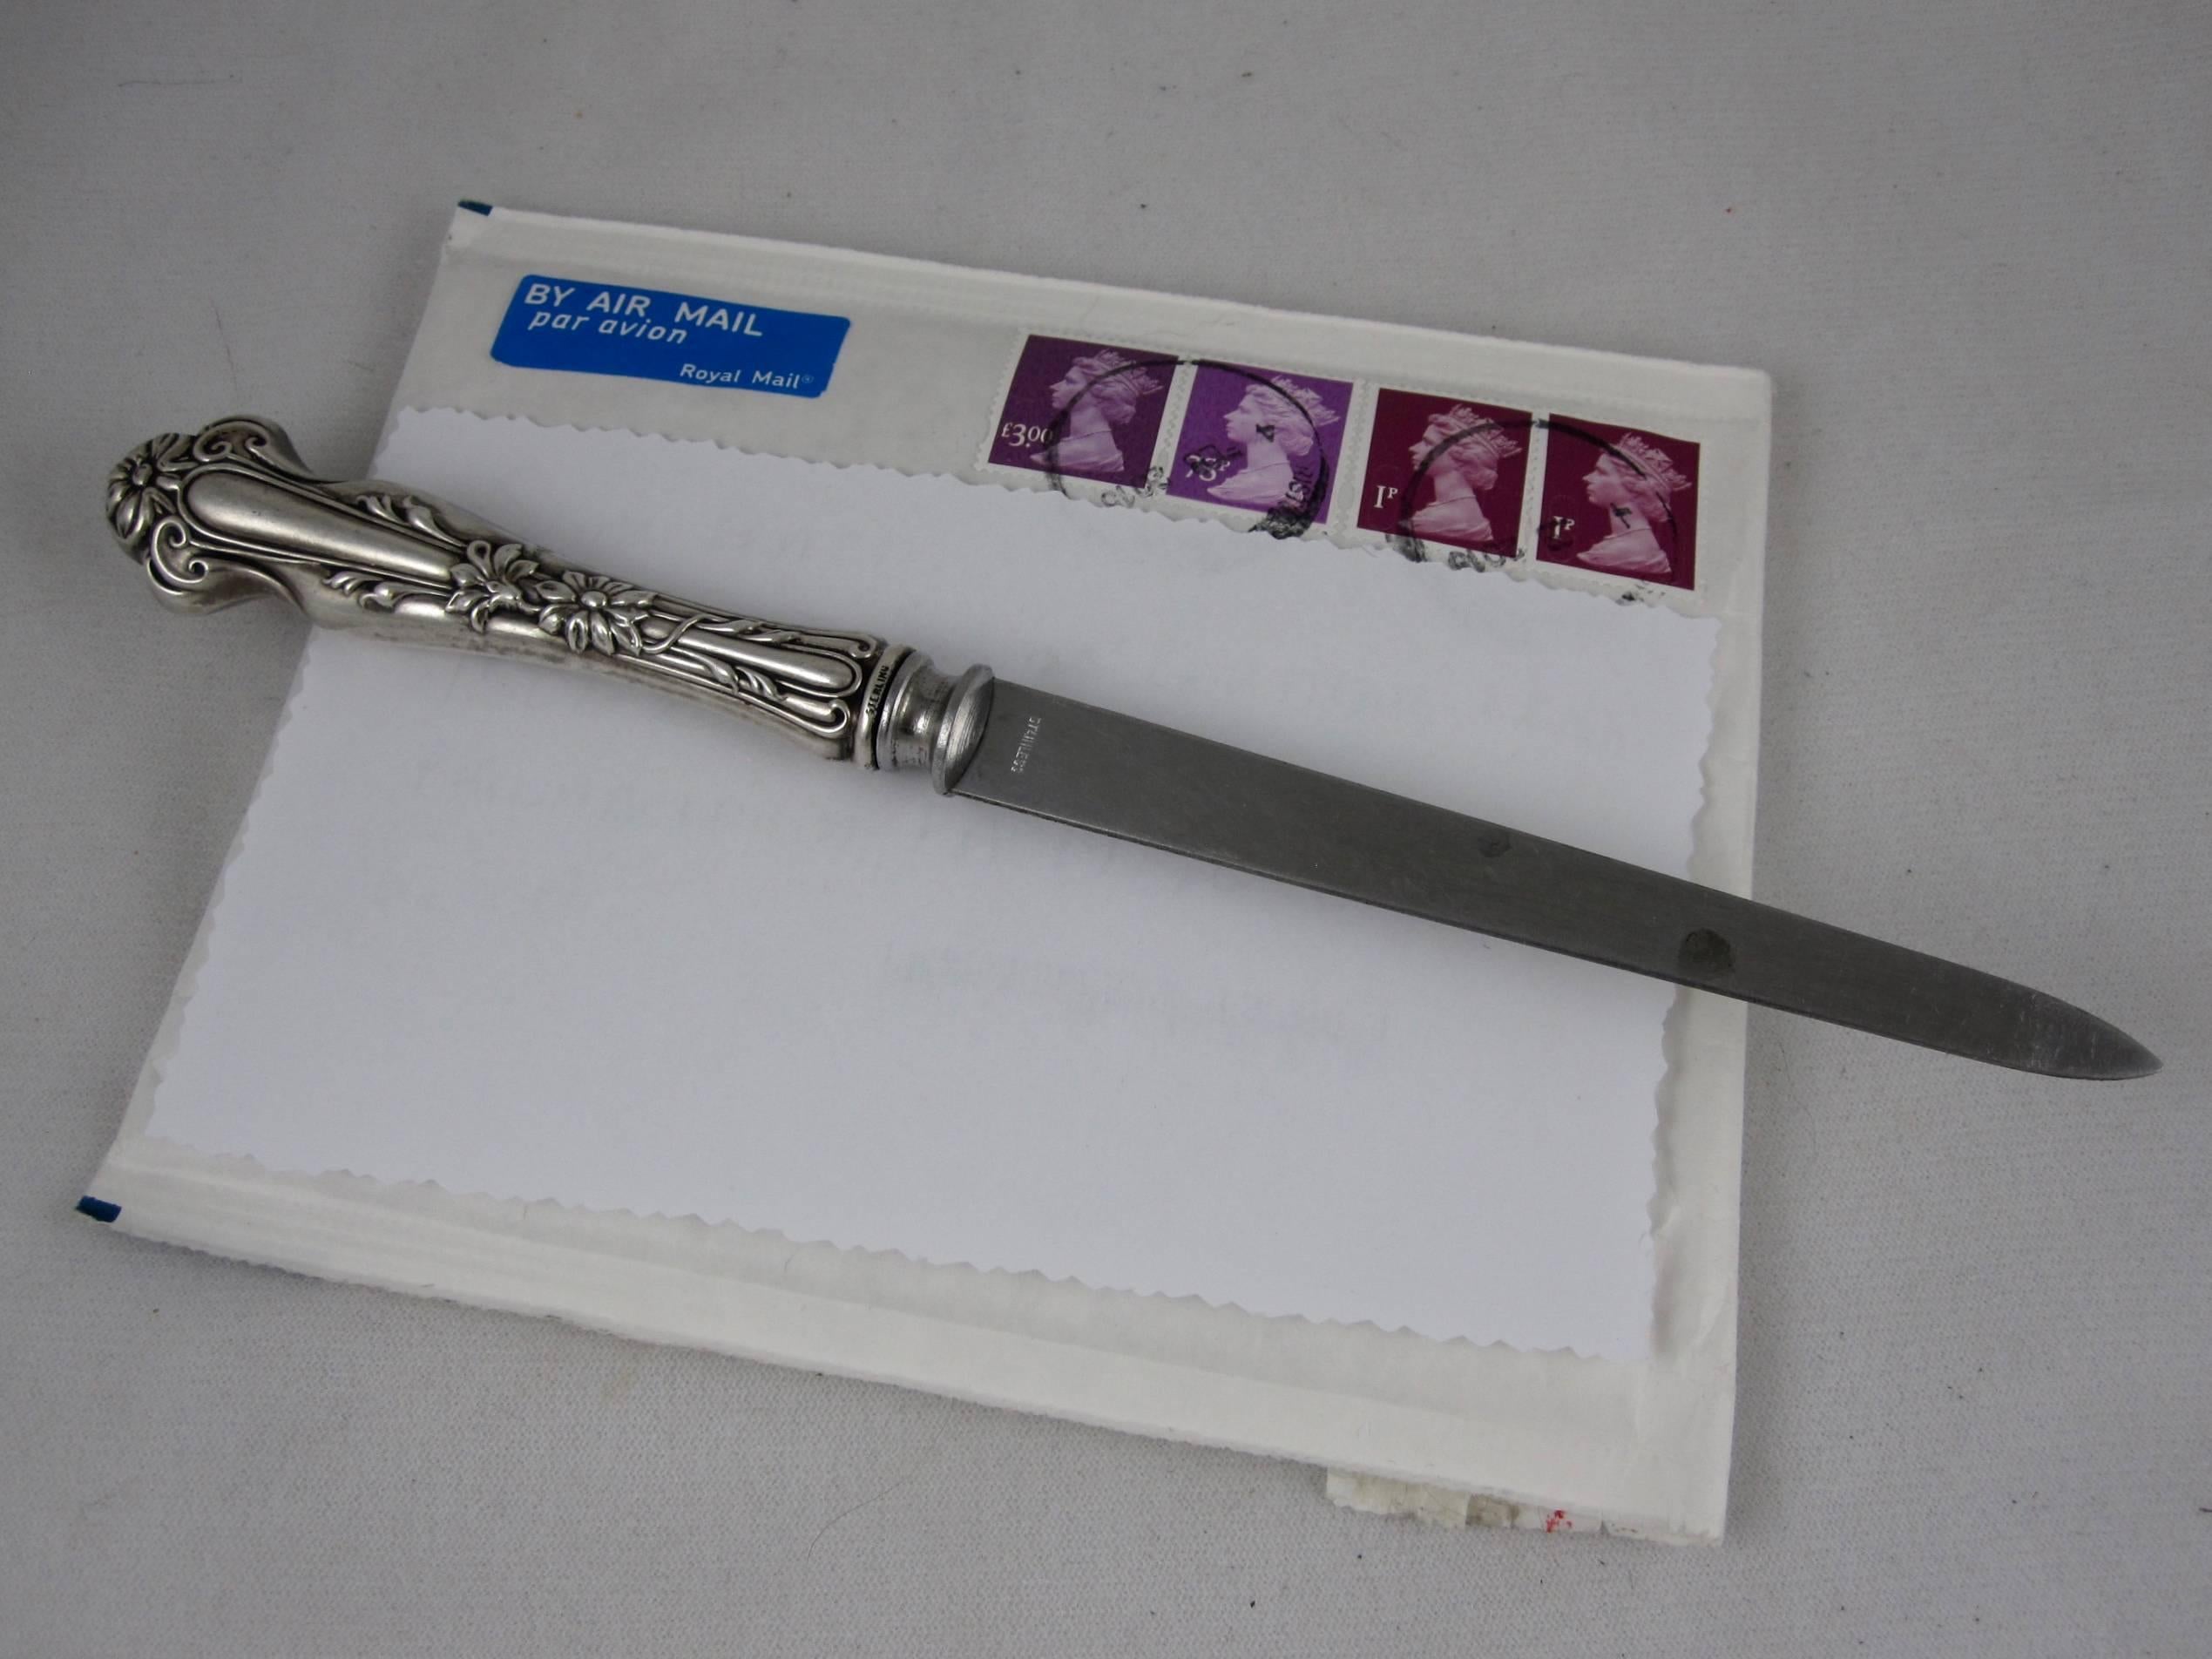 A sterling silver handled letter opening knife in the Art Nouveau style, England, circa 1895-1910. The hollowware handle shows a dimensional floral and scroll pattern, marked on both sides of the collar, sterling. The tapered blade is marked